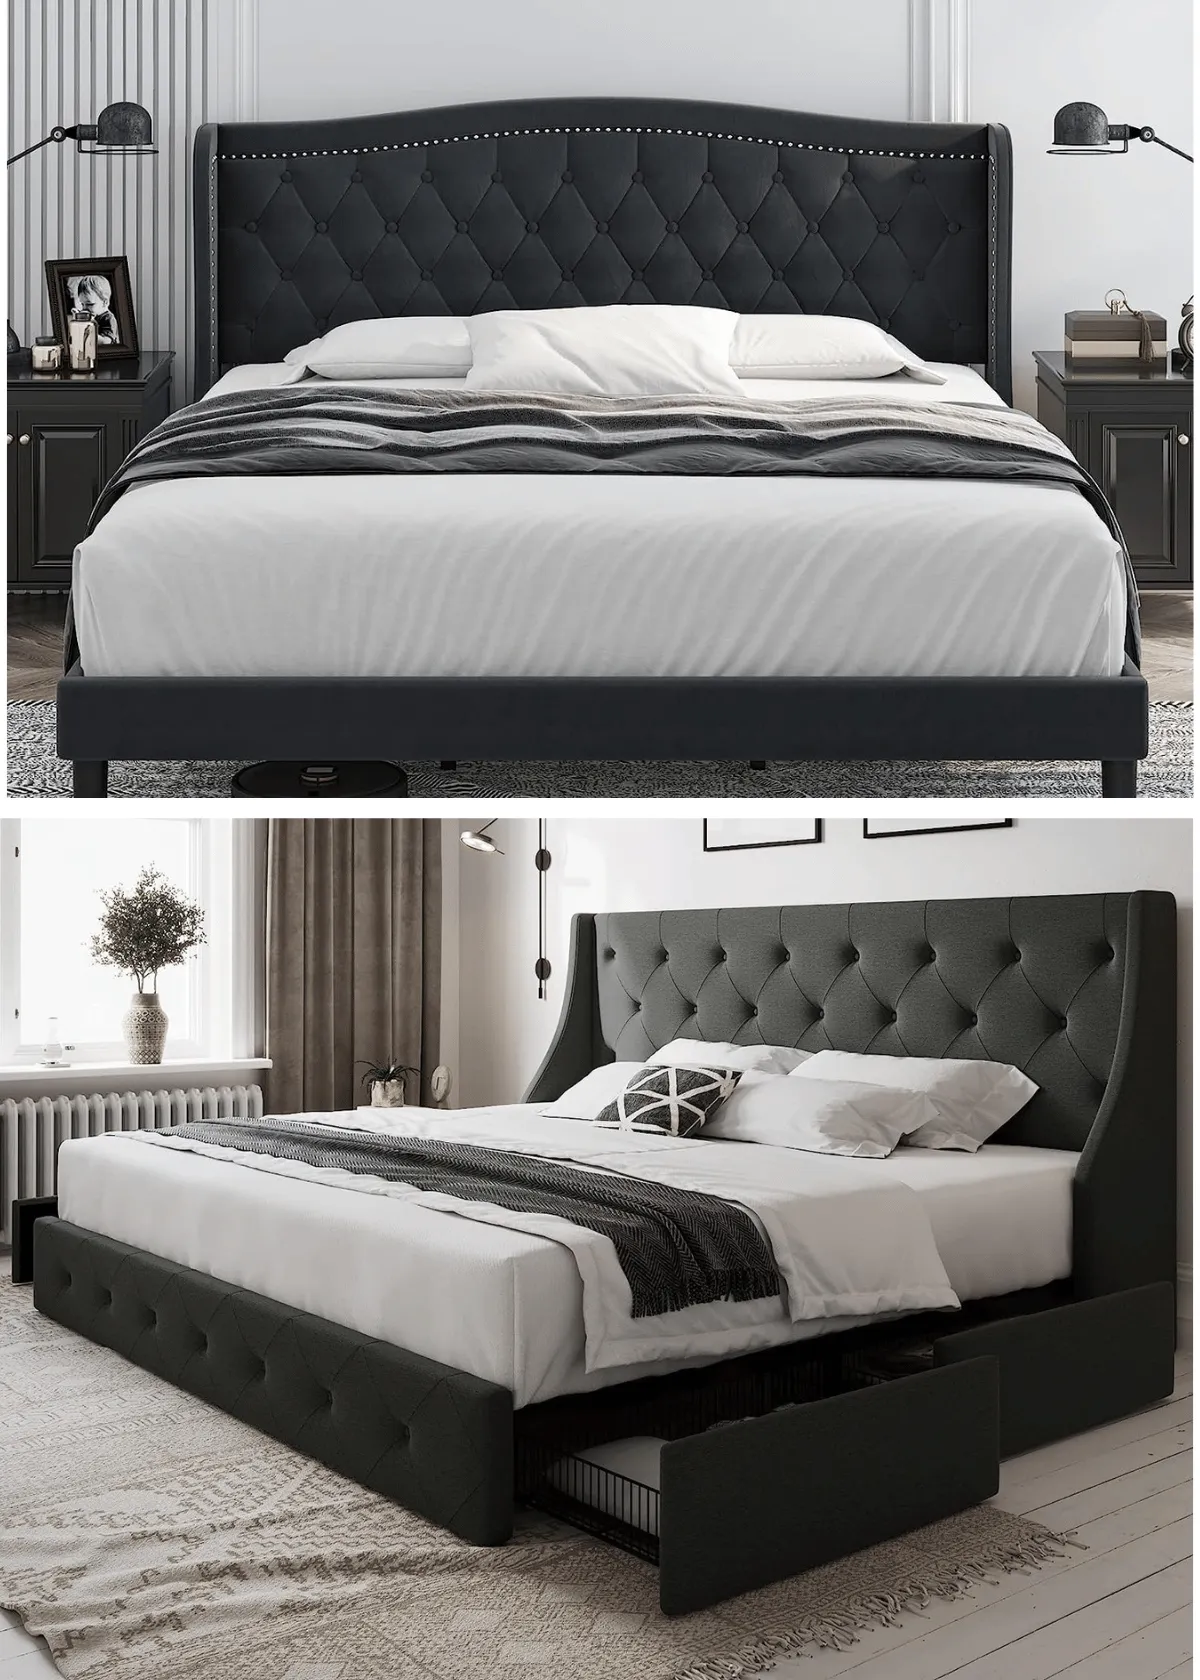 "Is the Grey Bed Frame The Best Pick for Every Budget and Style?"